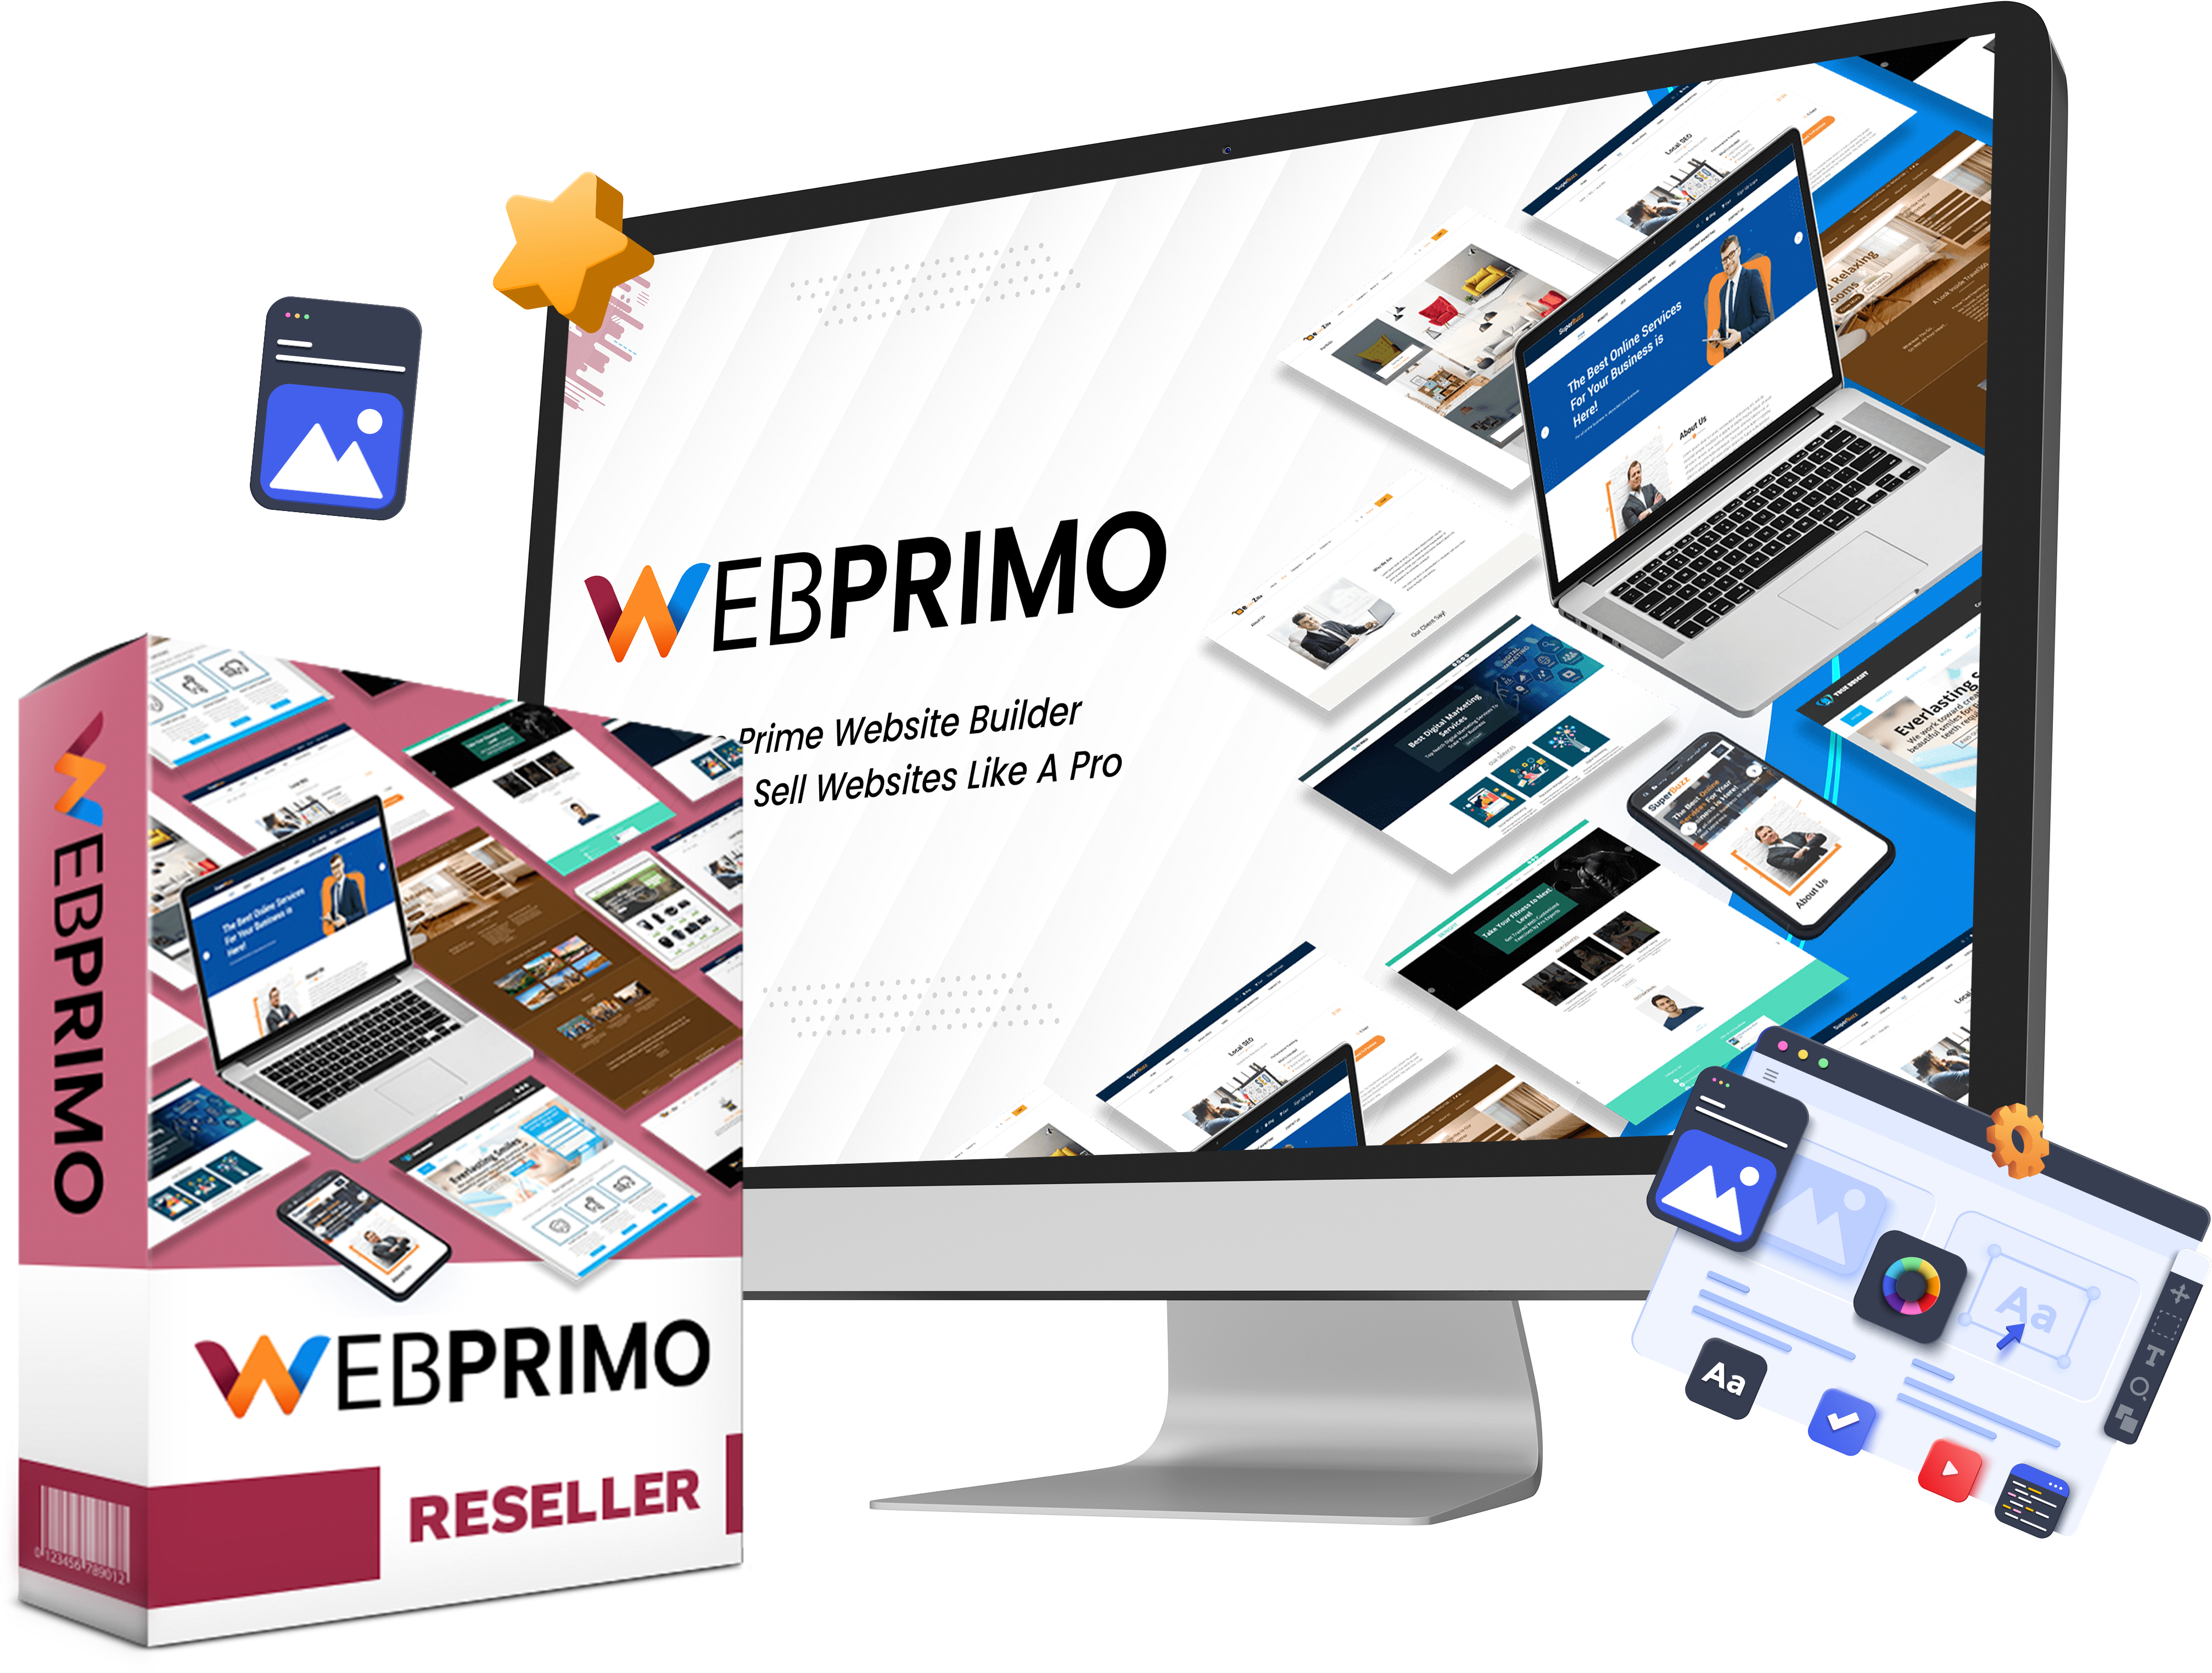 WebPrimo Review - Scan-Detects-Fixes for any niches